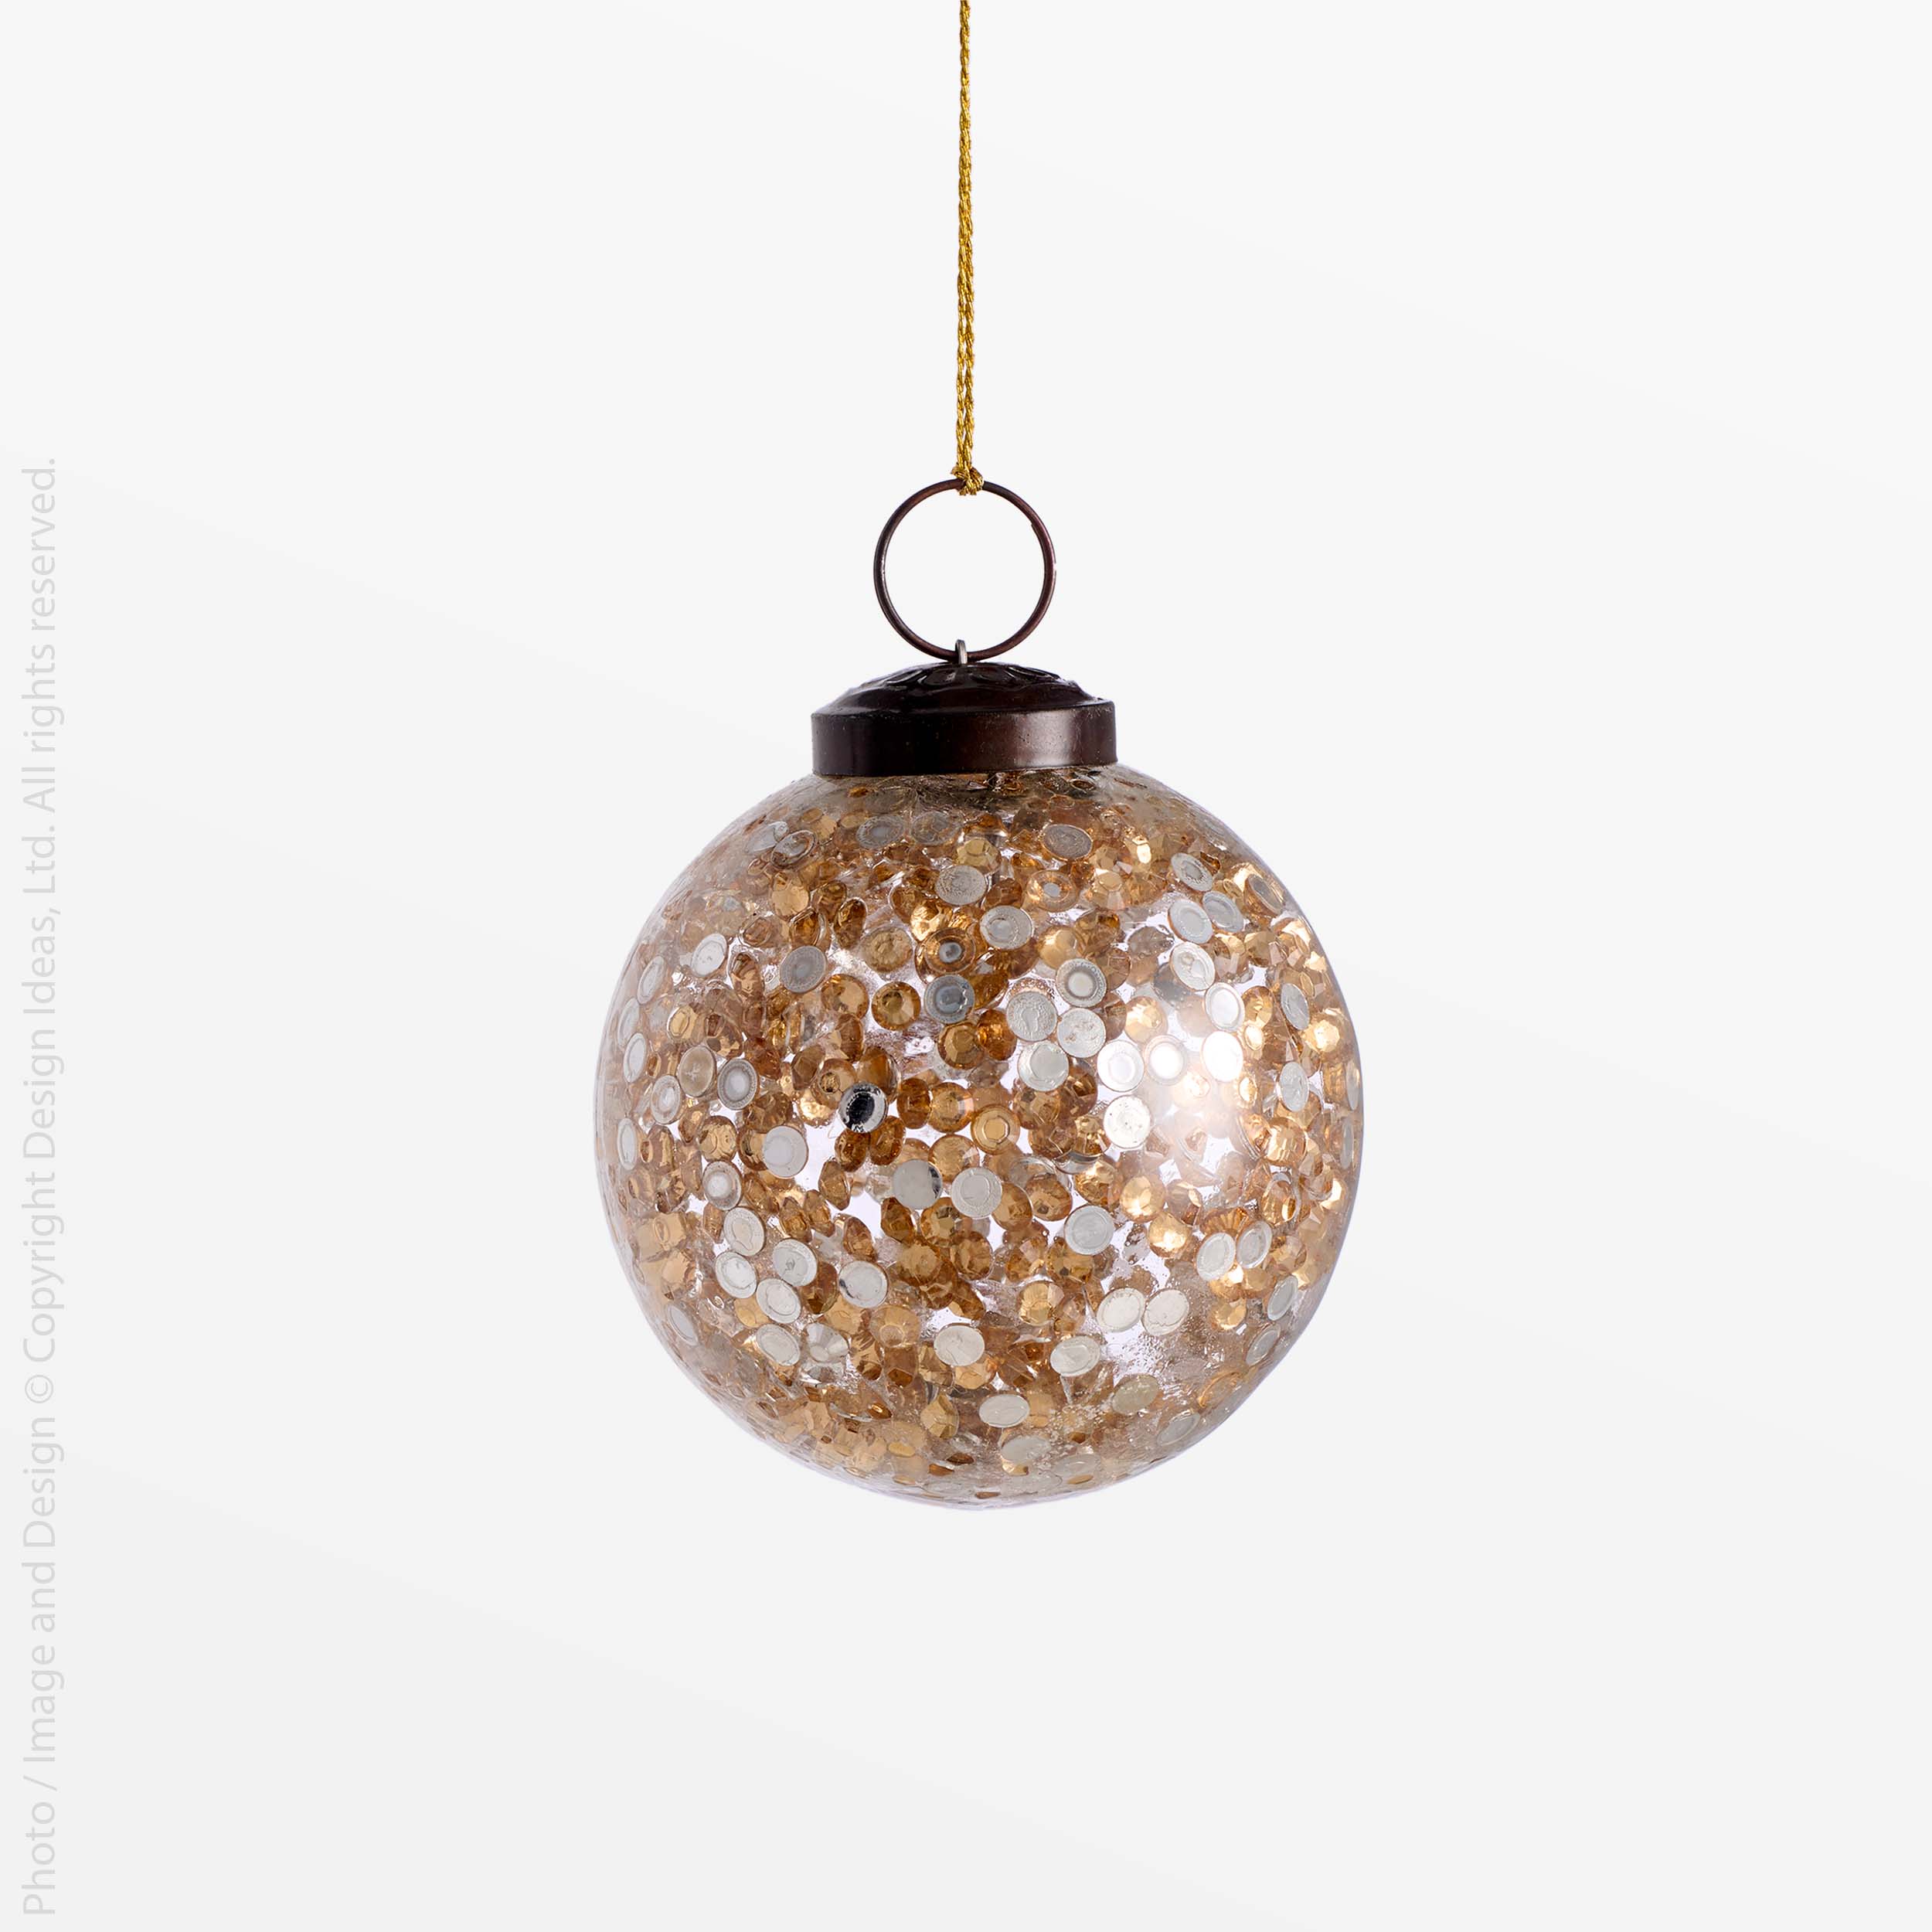 Zazzle™ ornament, 3in - Golden | Image 1 | Premium Ornaments from the Zazzle collection | made with Glass for long lasting use | texxture